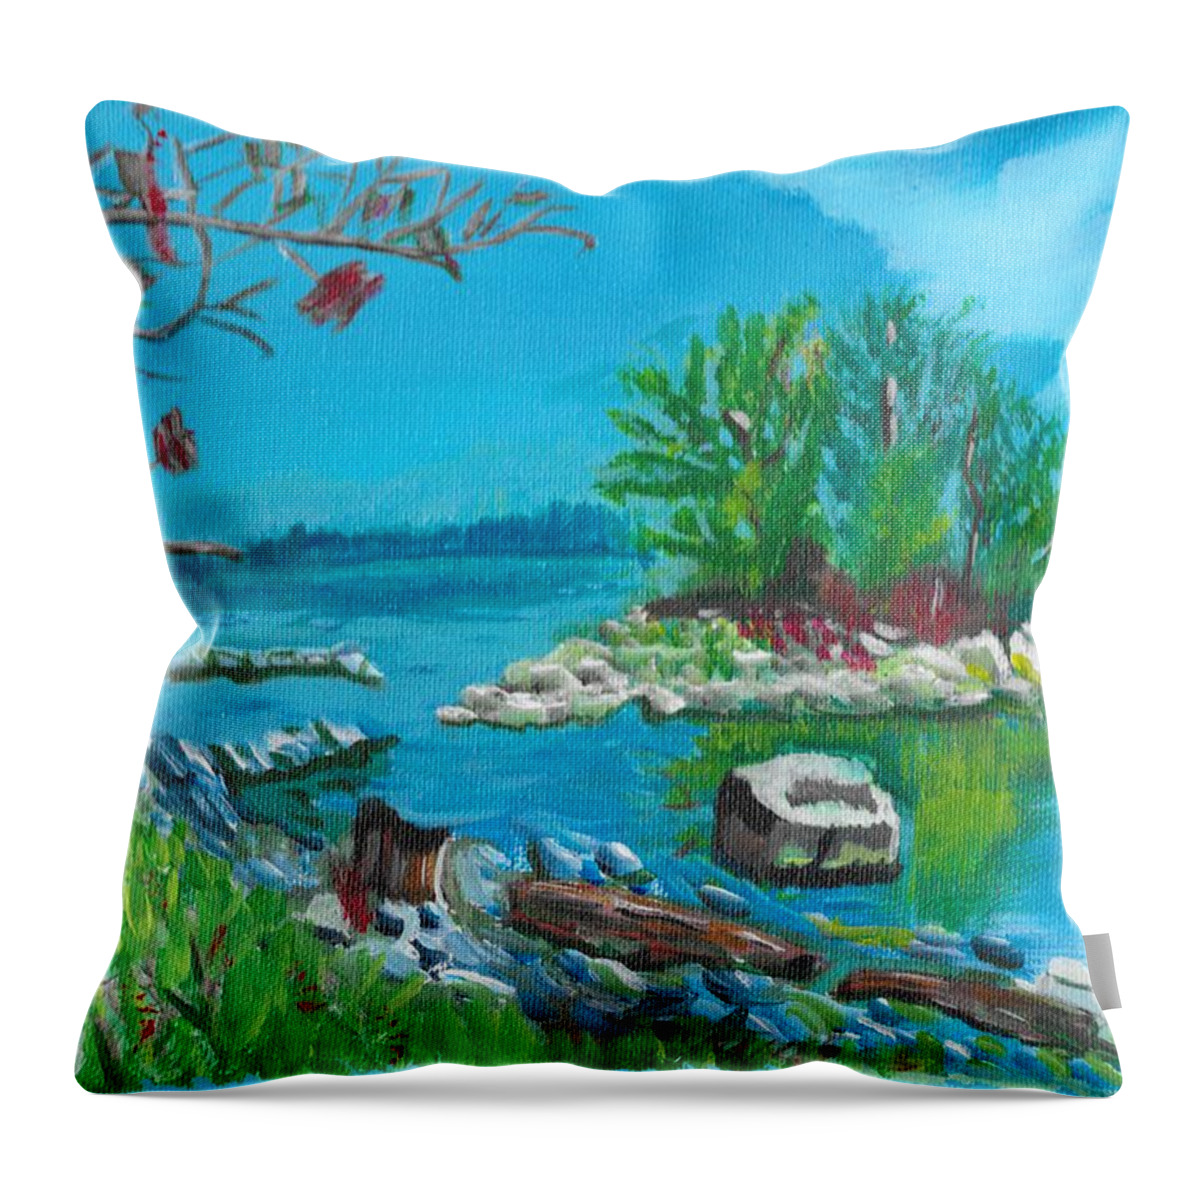 Landscape Throw Pillow featuring the painting Hamilton inner bay by David Bigelow